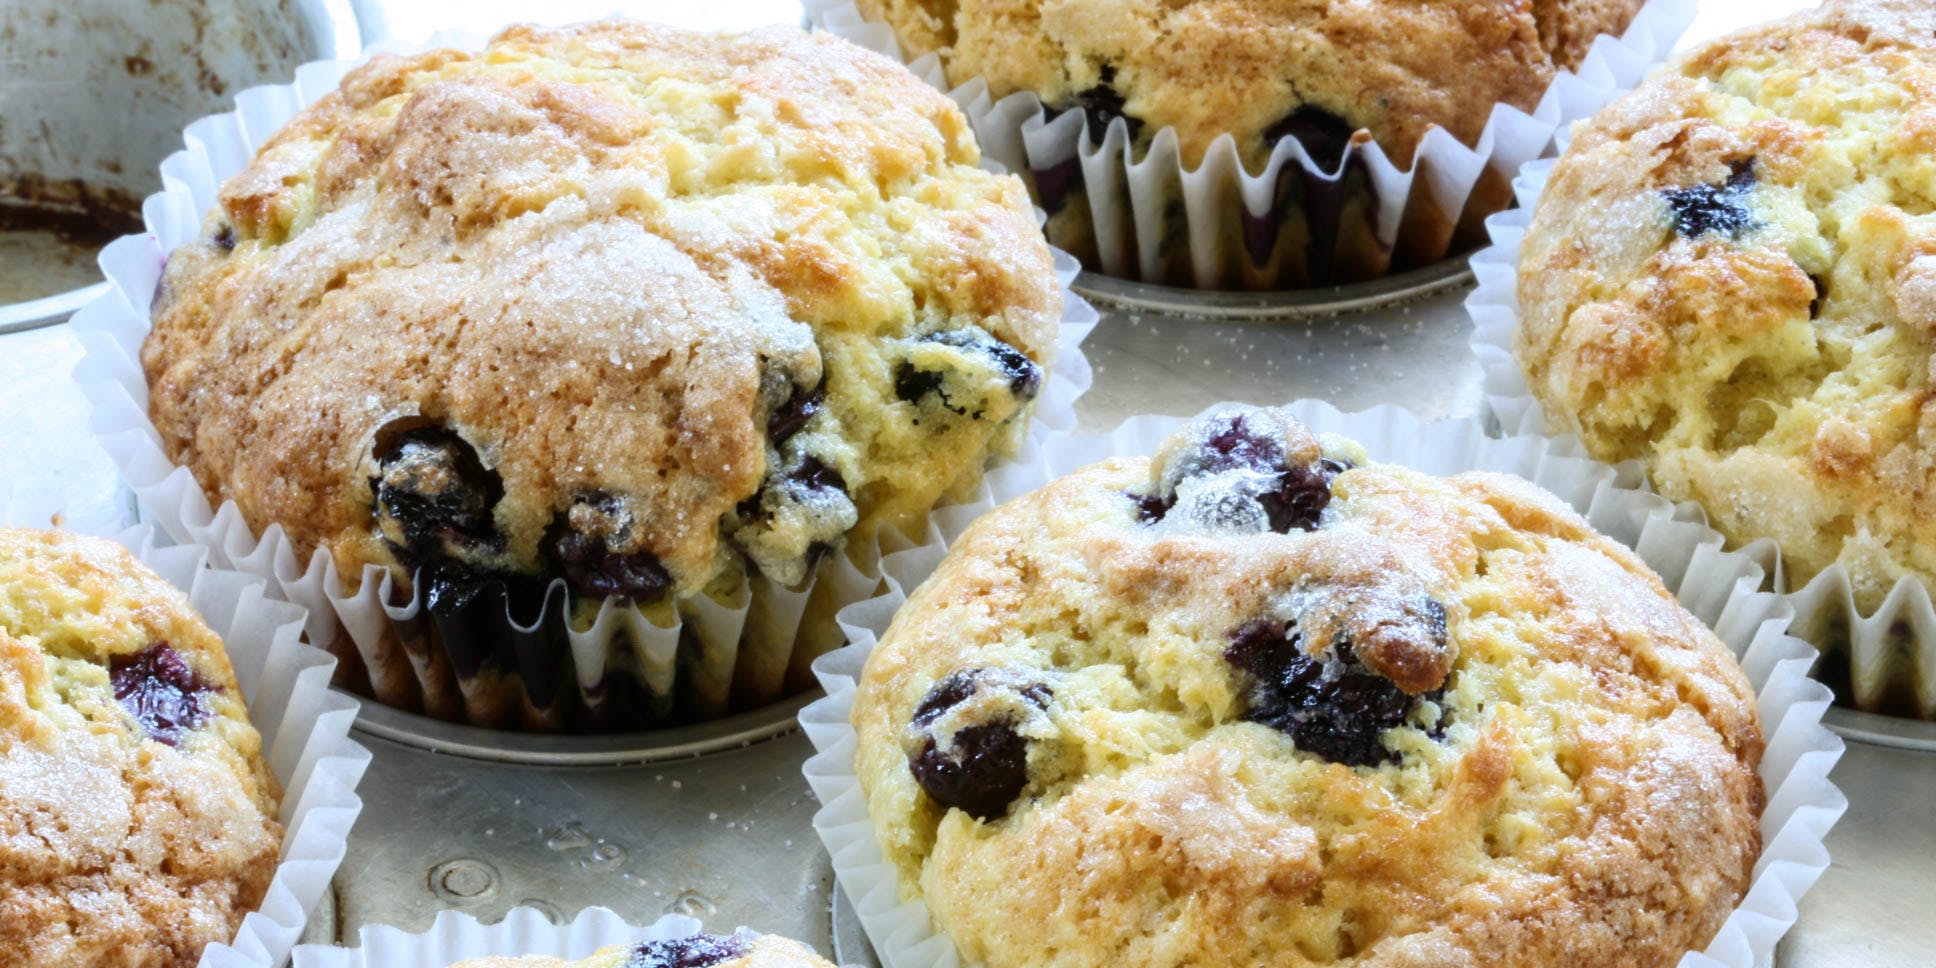 How to Make Cannabis-Infused Blueberry Muffins